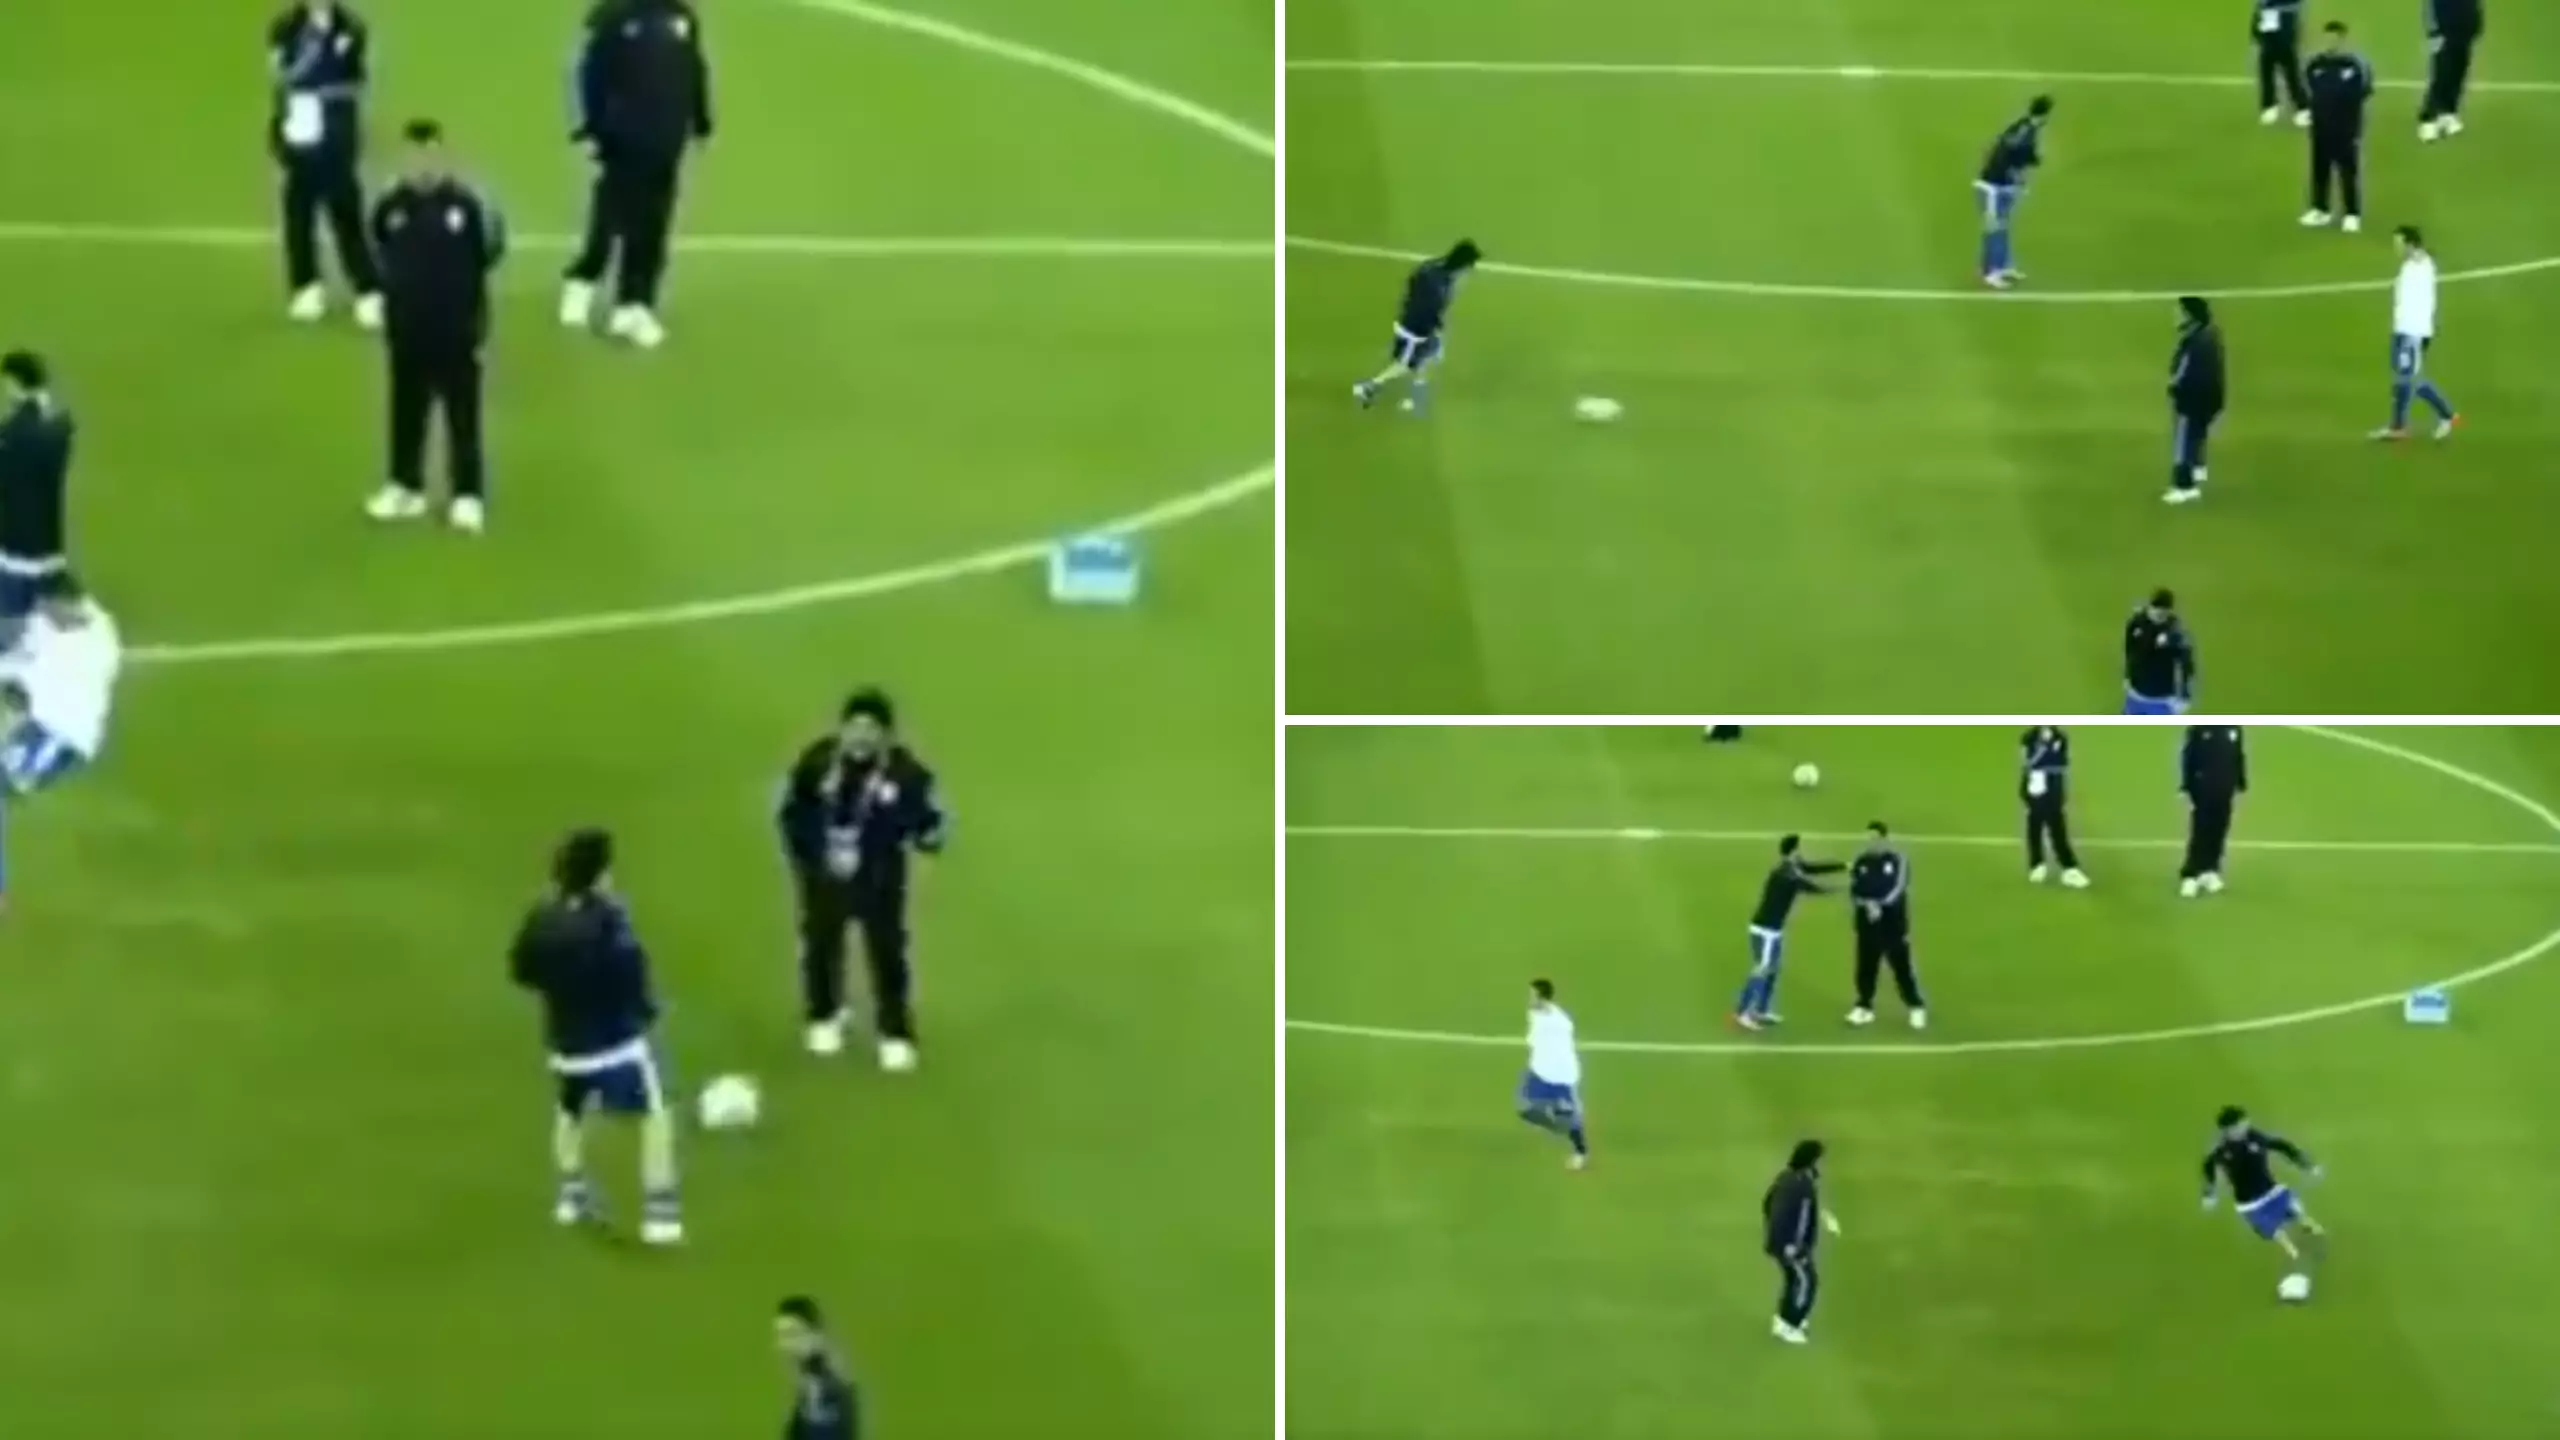 Rare Footage Of Lionel Messi And Diego Maradona Passing To Each Other Is Incredibly Silky